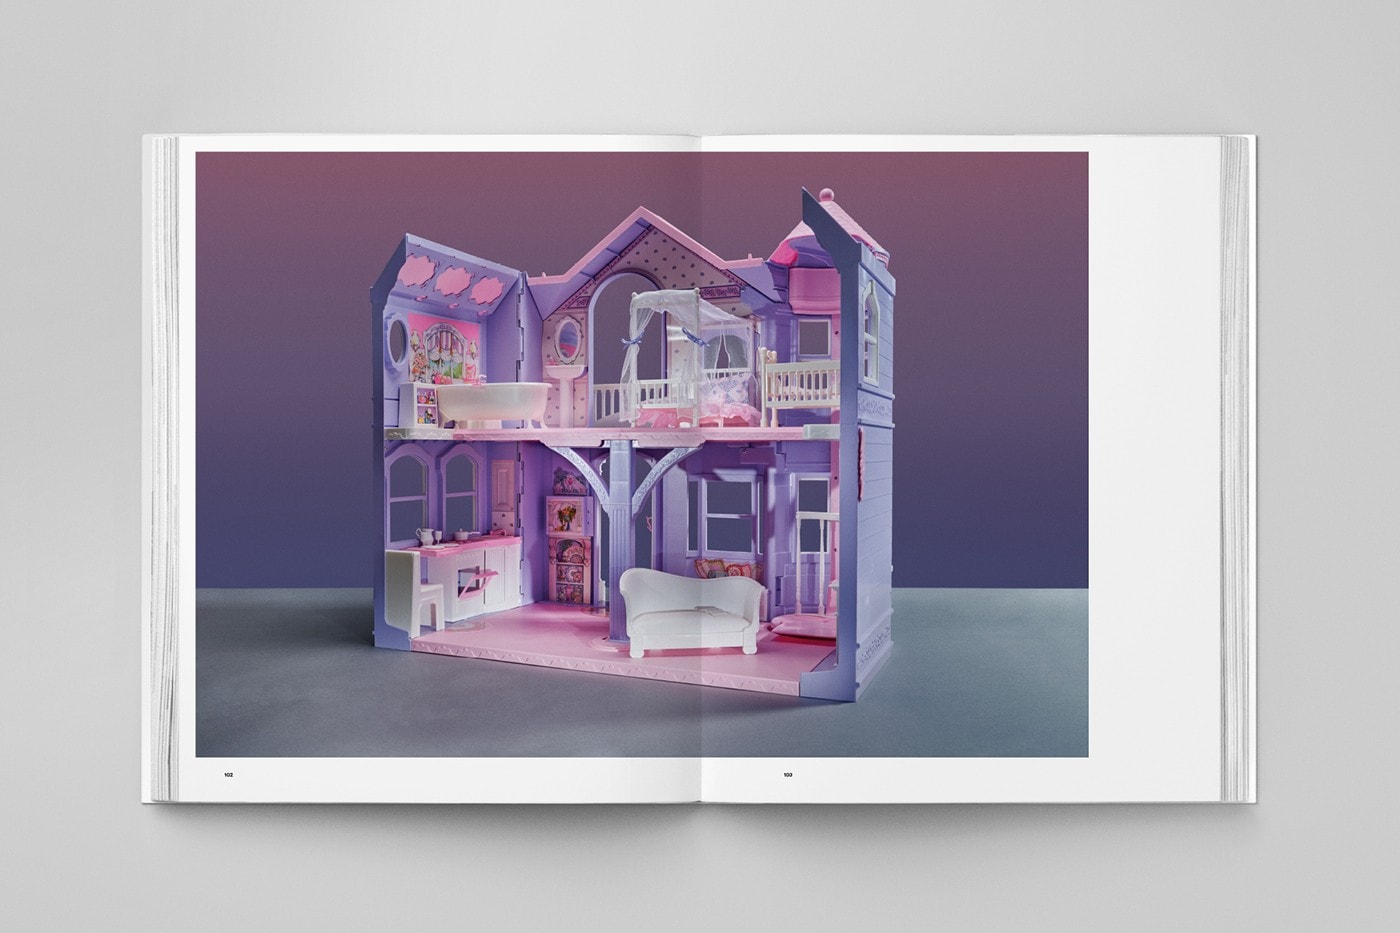 barbie dreamhouse book architecture photos sketches drawings